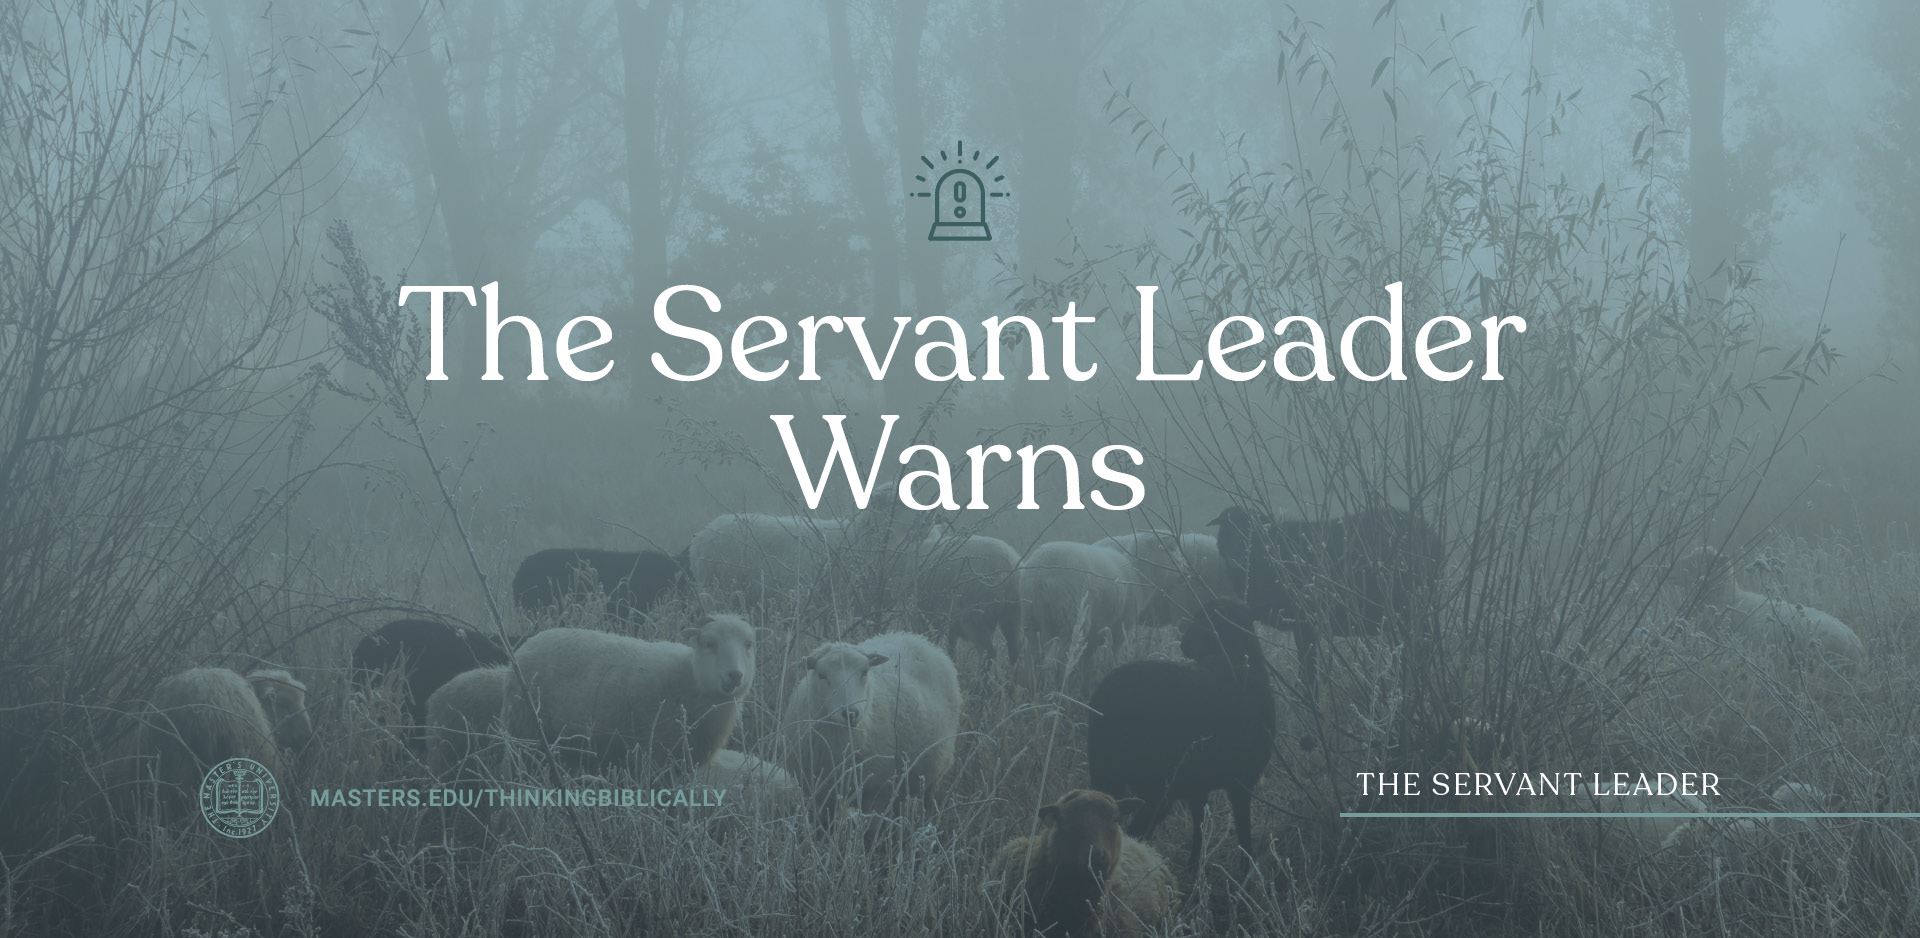 The Servant Leader Warns Featured Image